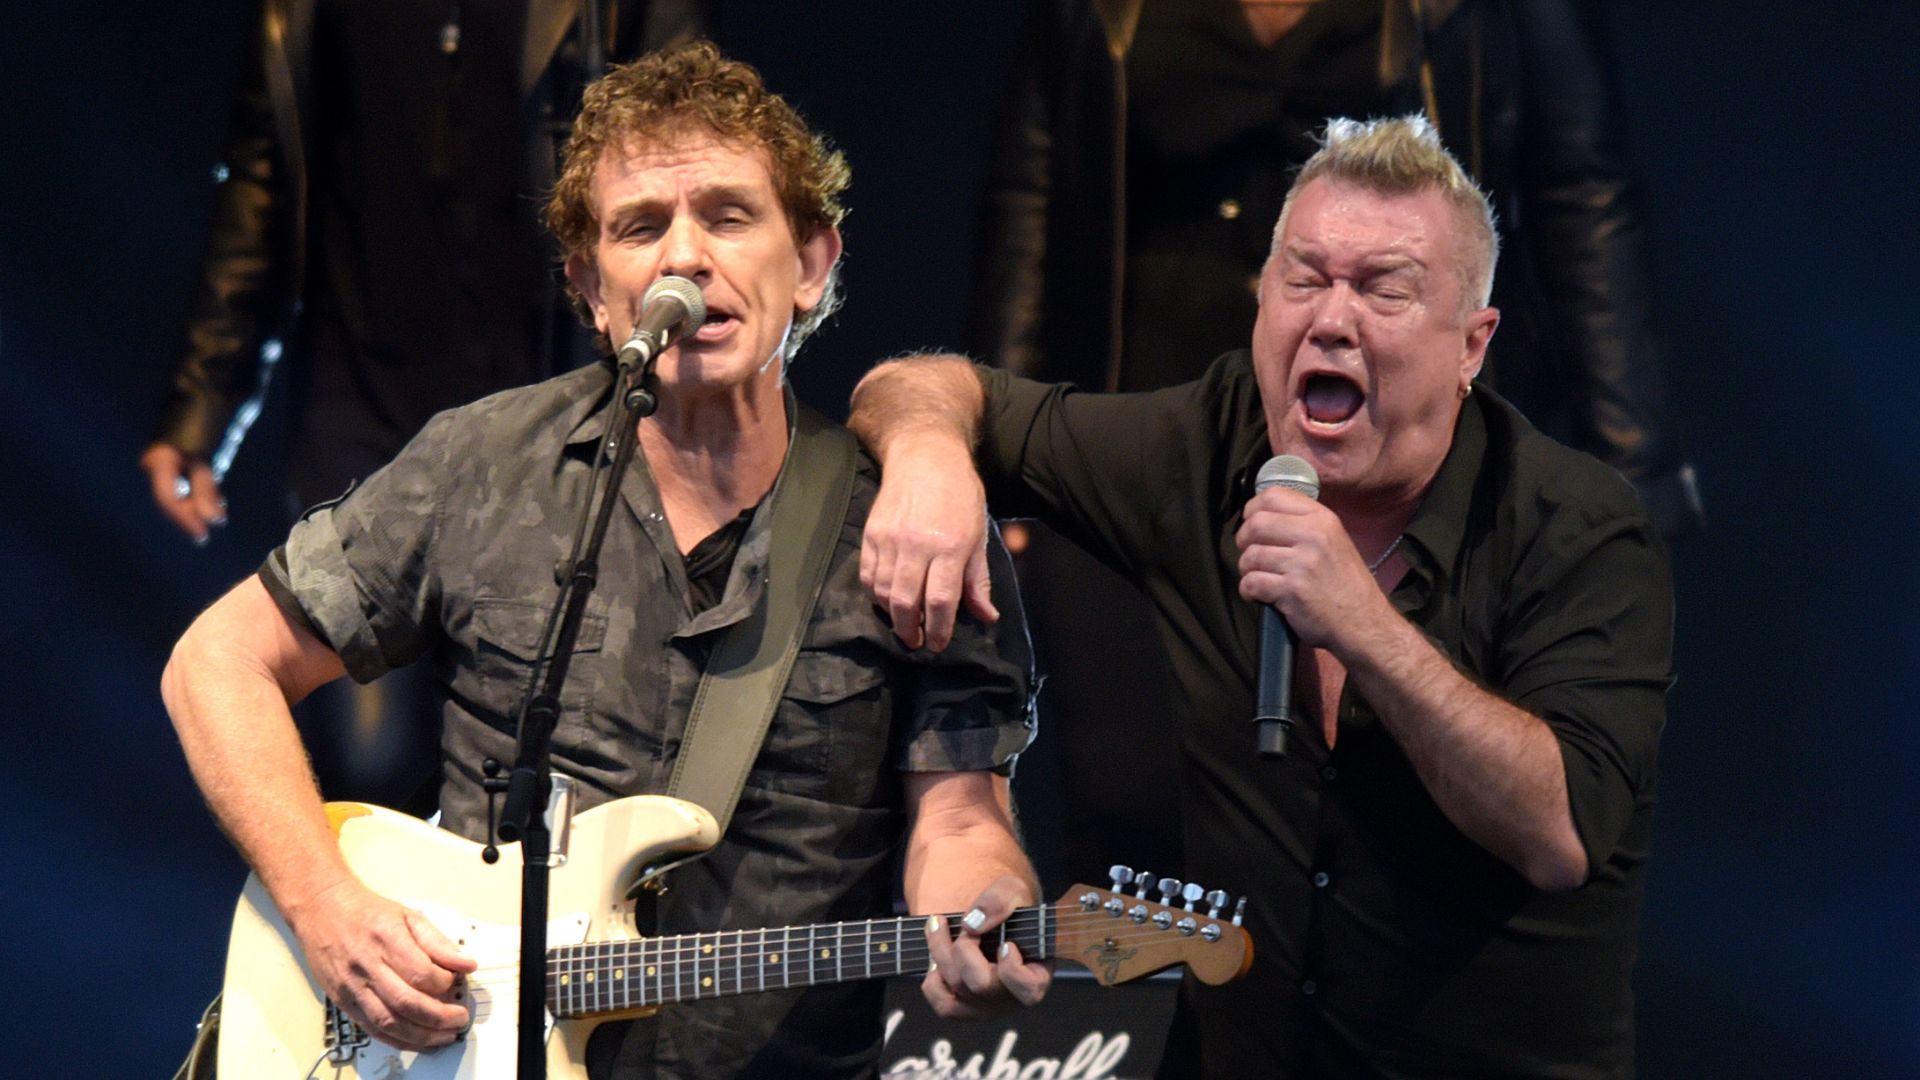 Cold Chisel announces national tour to celebrate their 50th anniversary